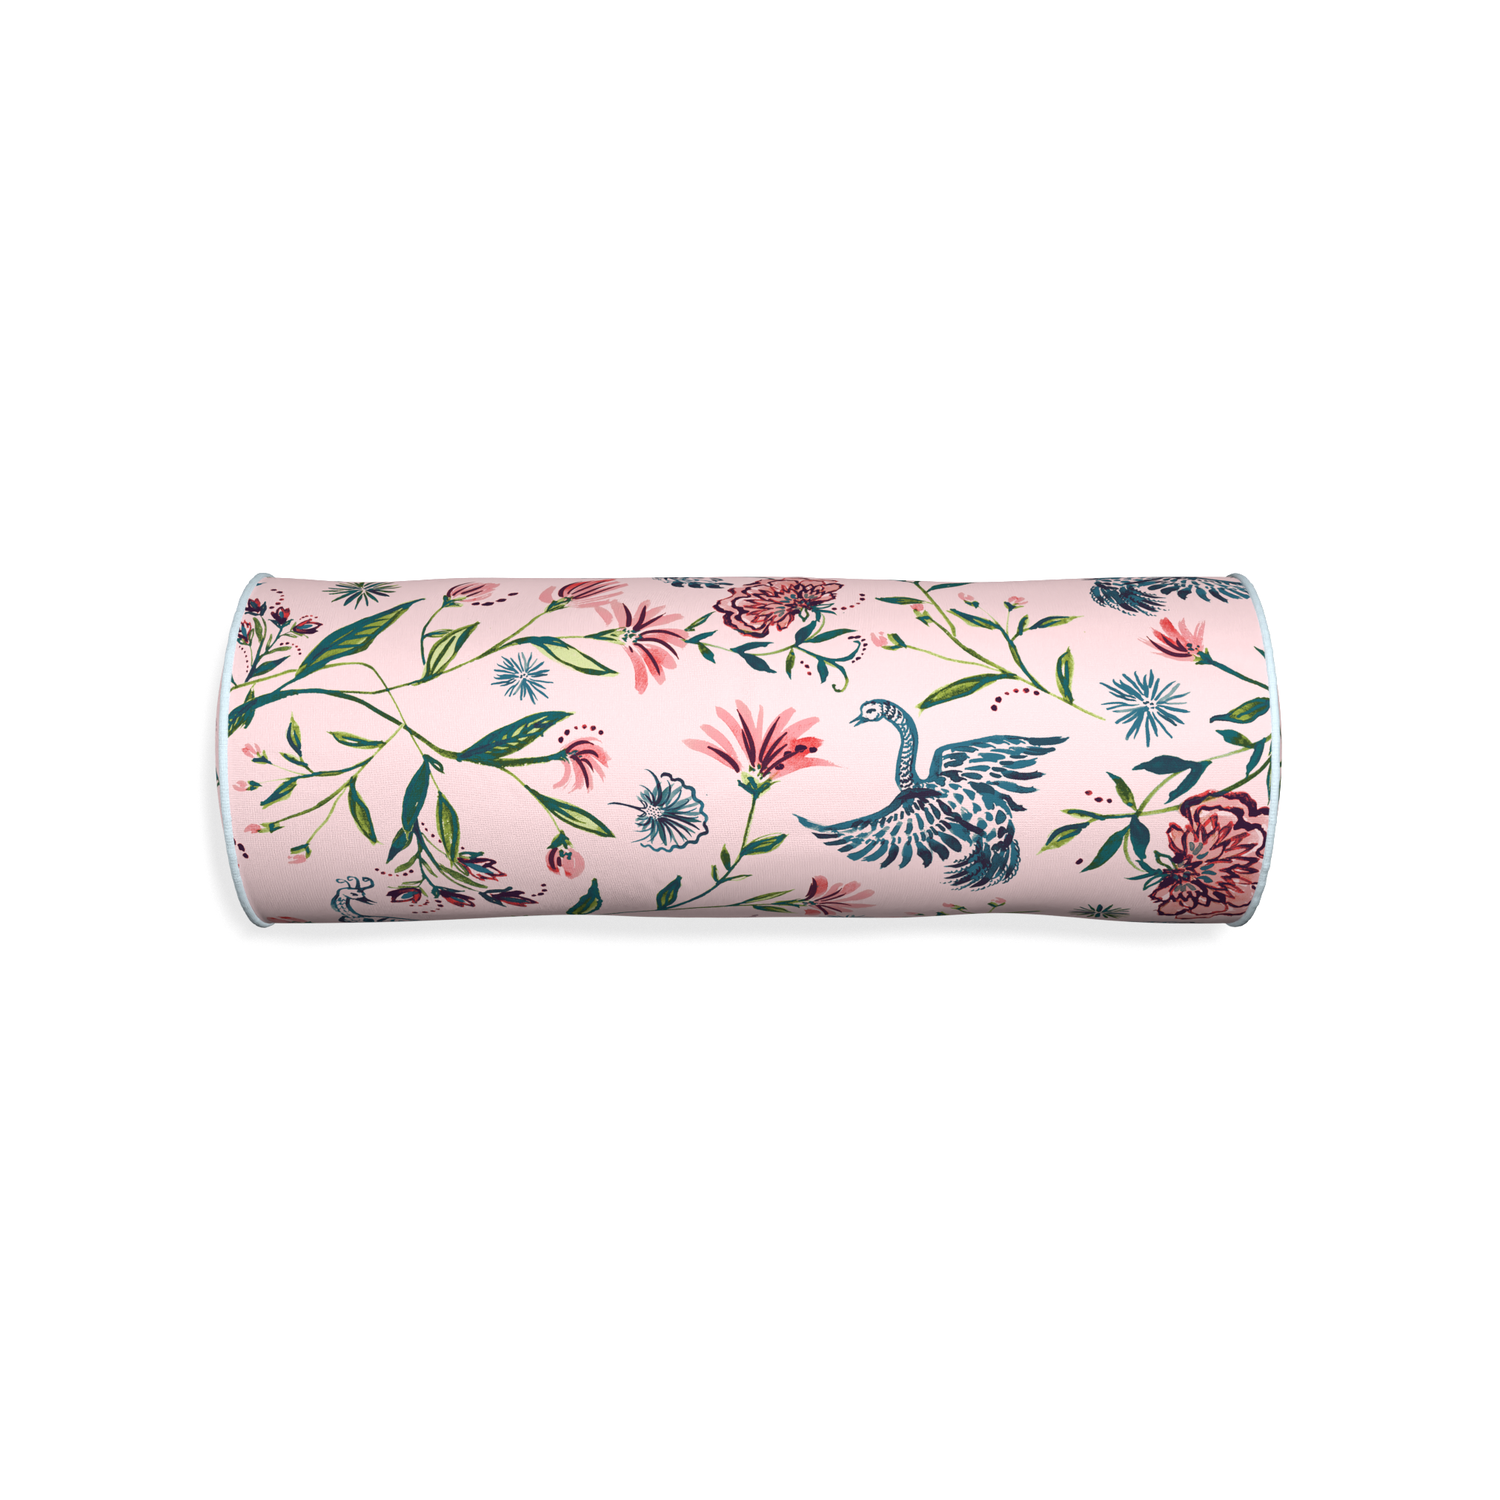 Bolster daphne rose custom rose chinoiseriepillow with powder piping on white background